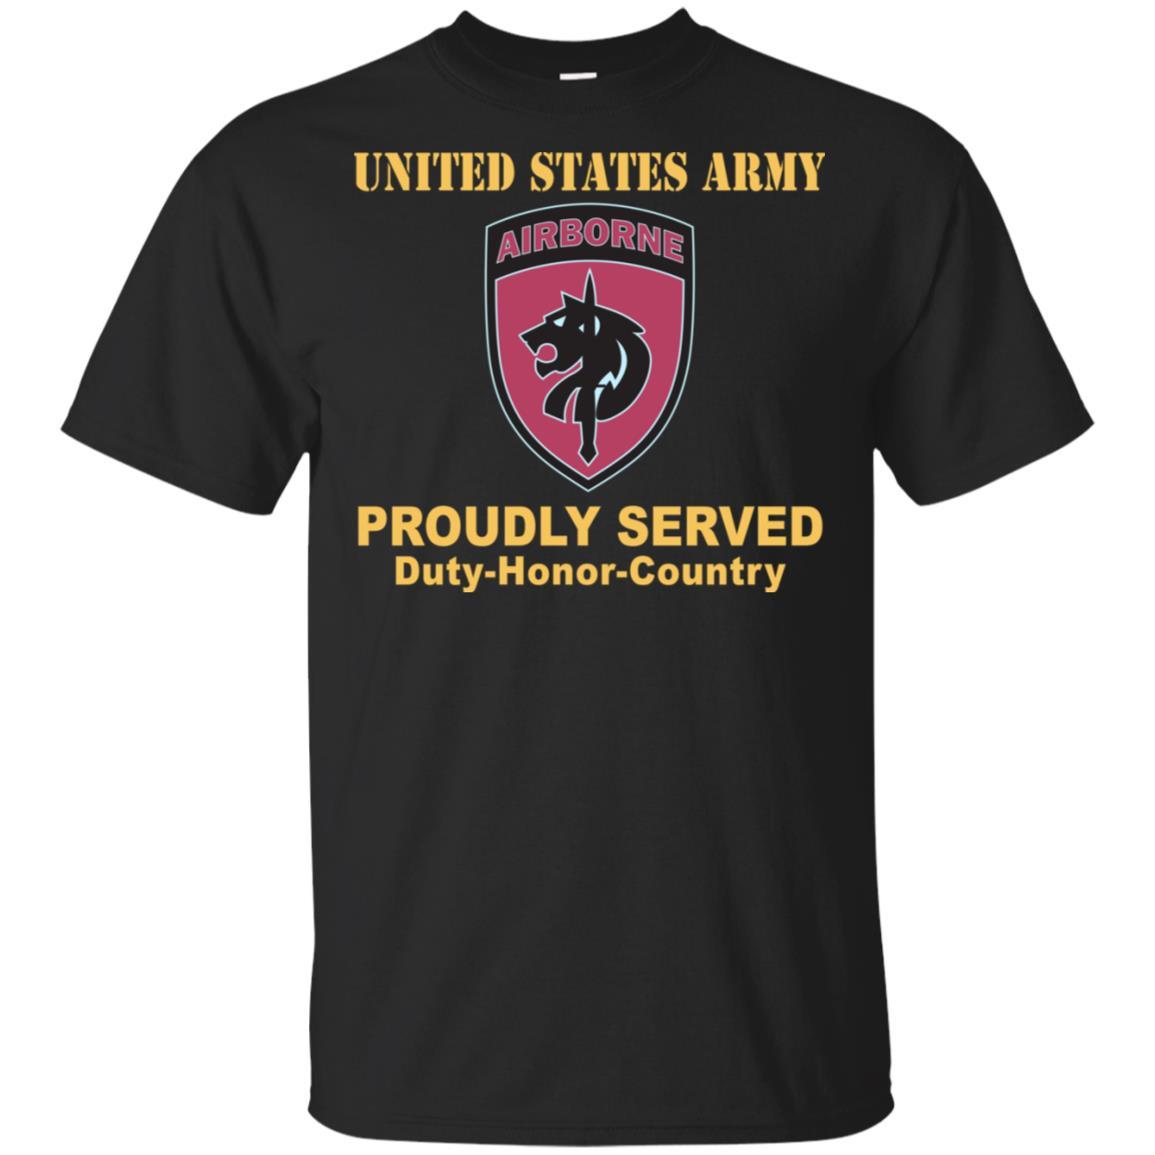 US ARMY SPECIAL OPERATIONS COMMAND AFRICA- Proudly Served T-Shirt On Front For Men-TShirt-Army-Veterans Nation